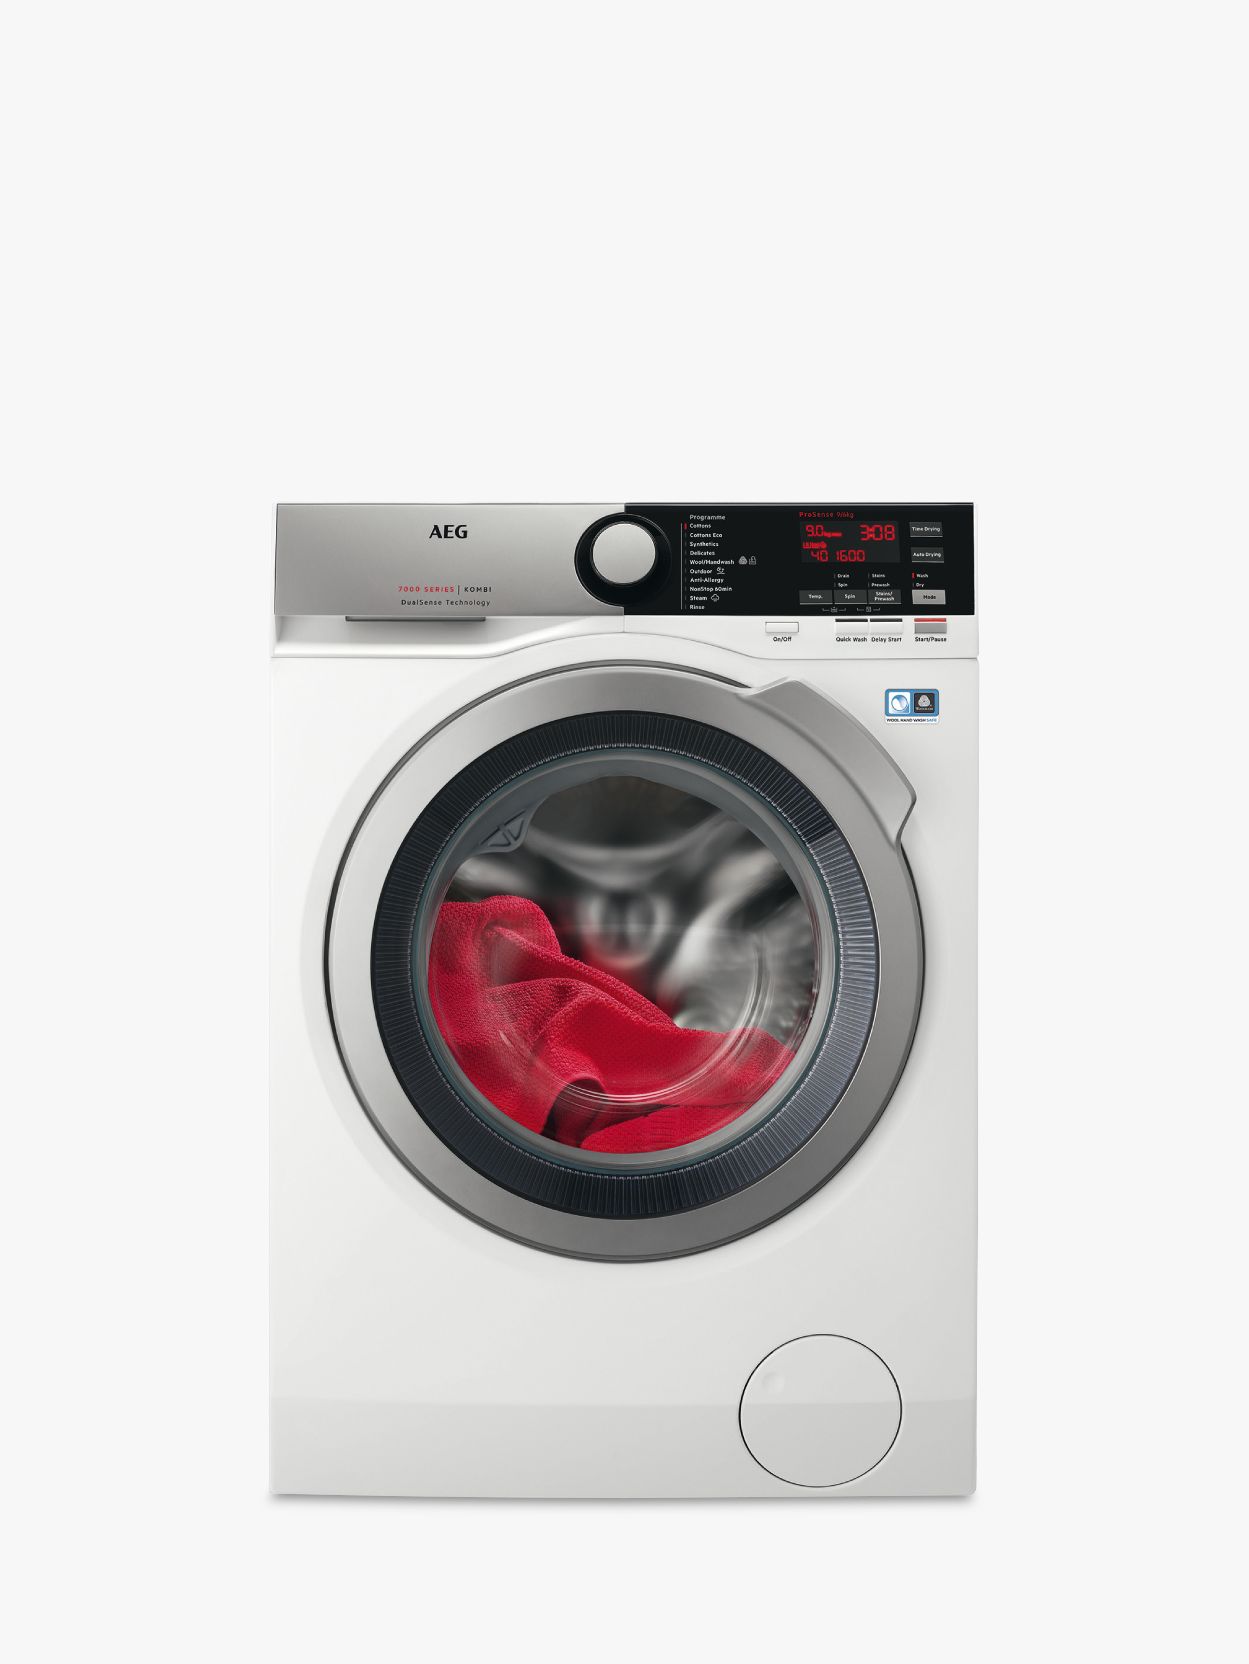 AEG L7WEE965R Freestanding Washer Dryer, 9kg Wash/6kg Dry Load, A Energy Rating, 1600rpm Spin, White Gloss